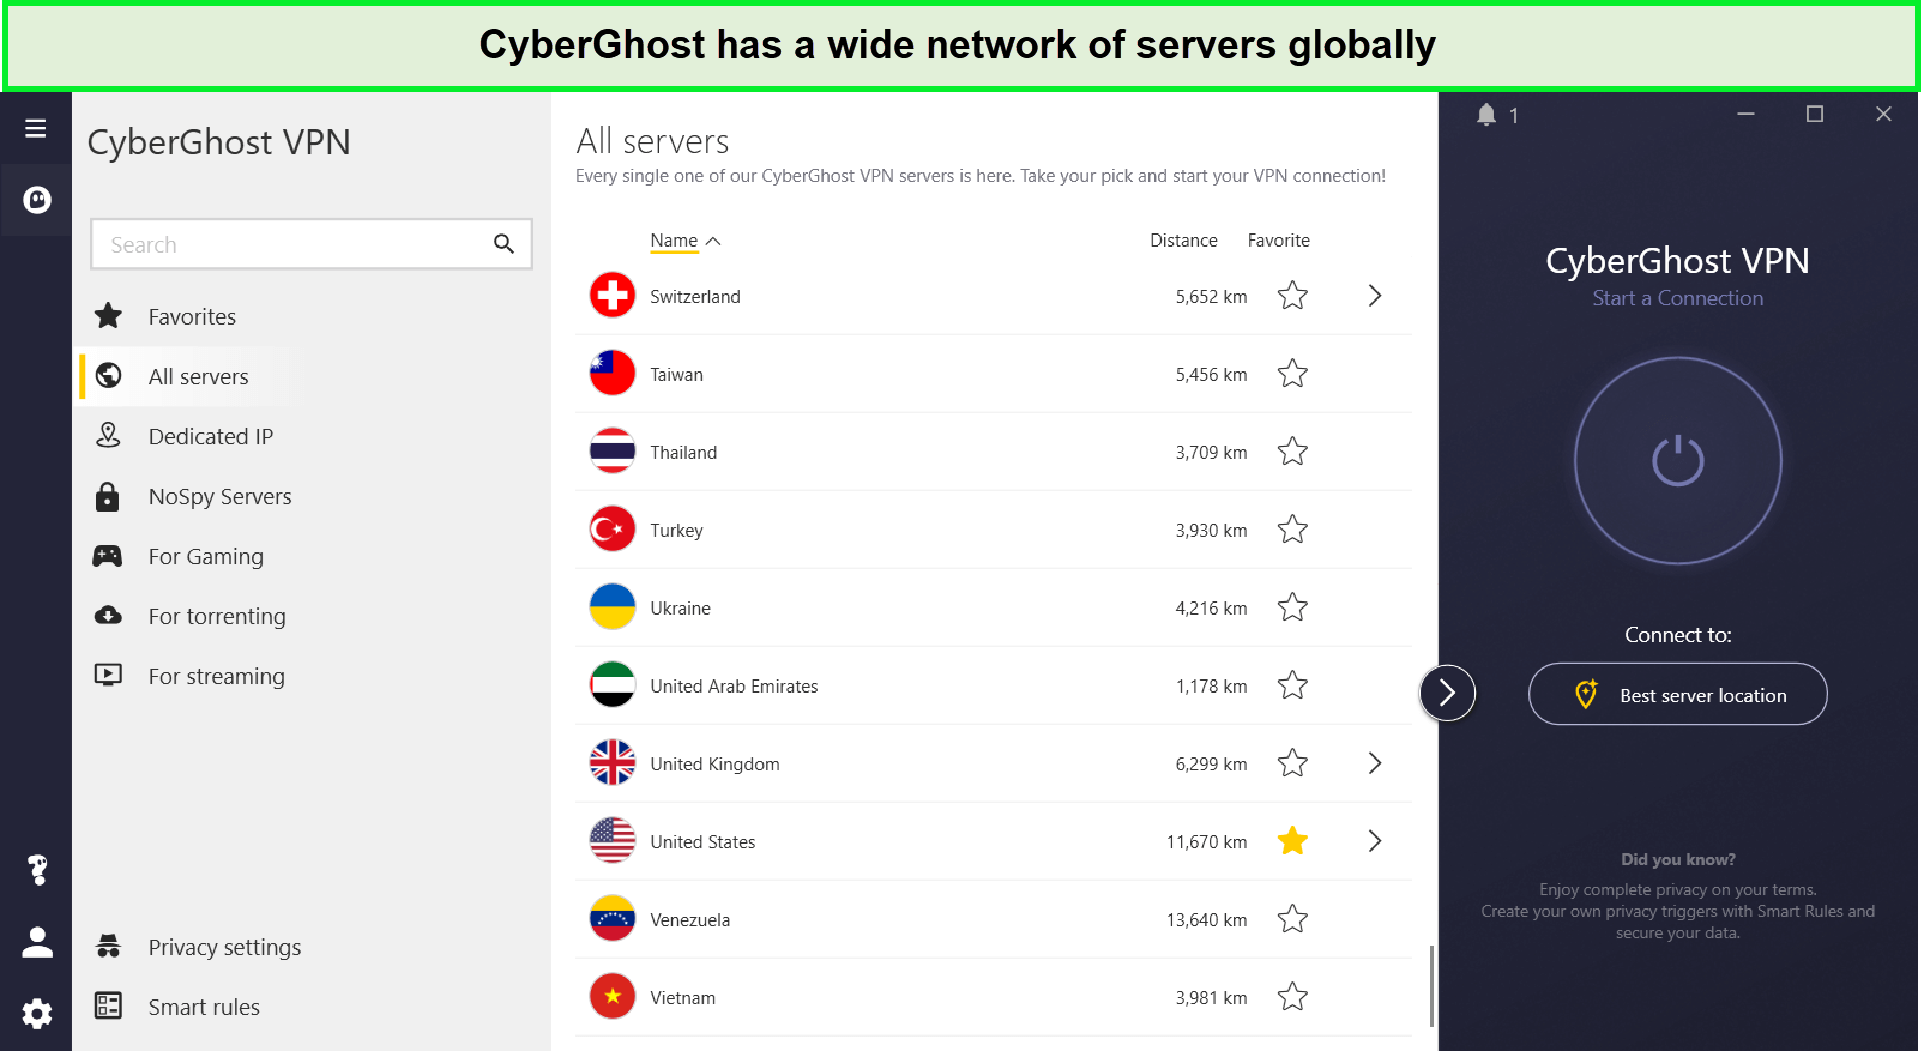 cyberghost-global-server-network-in-Italy